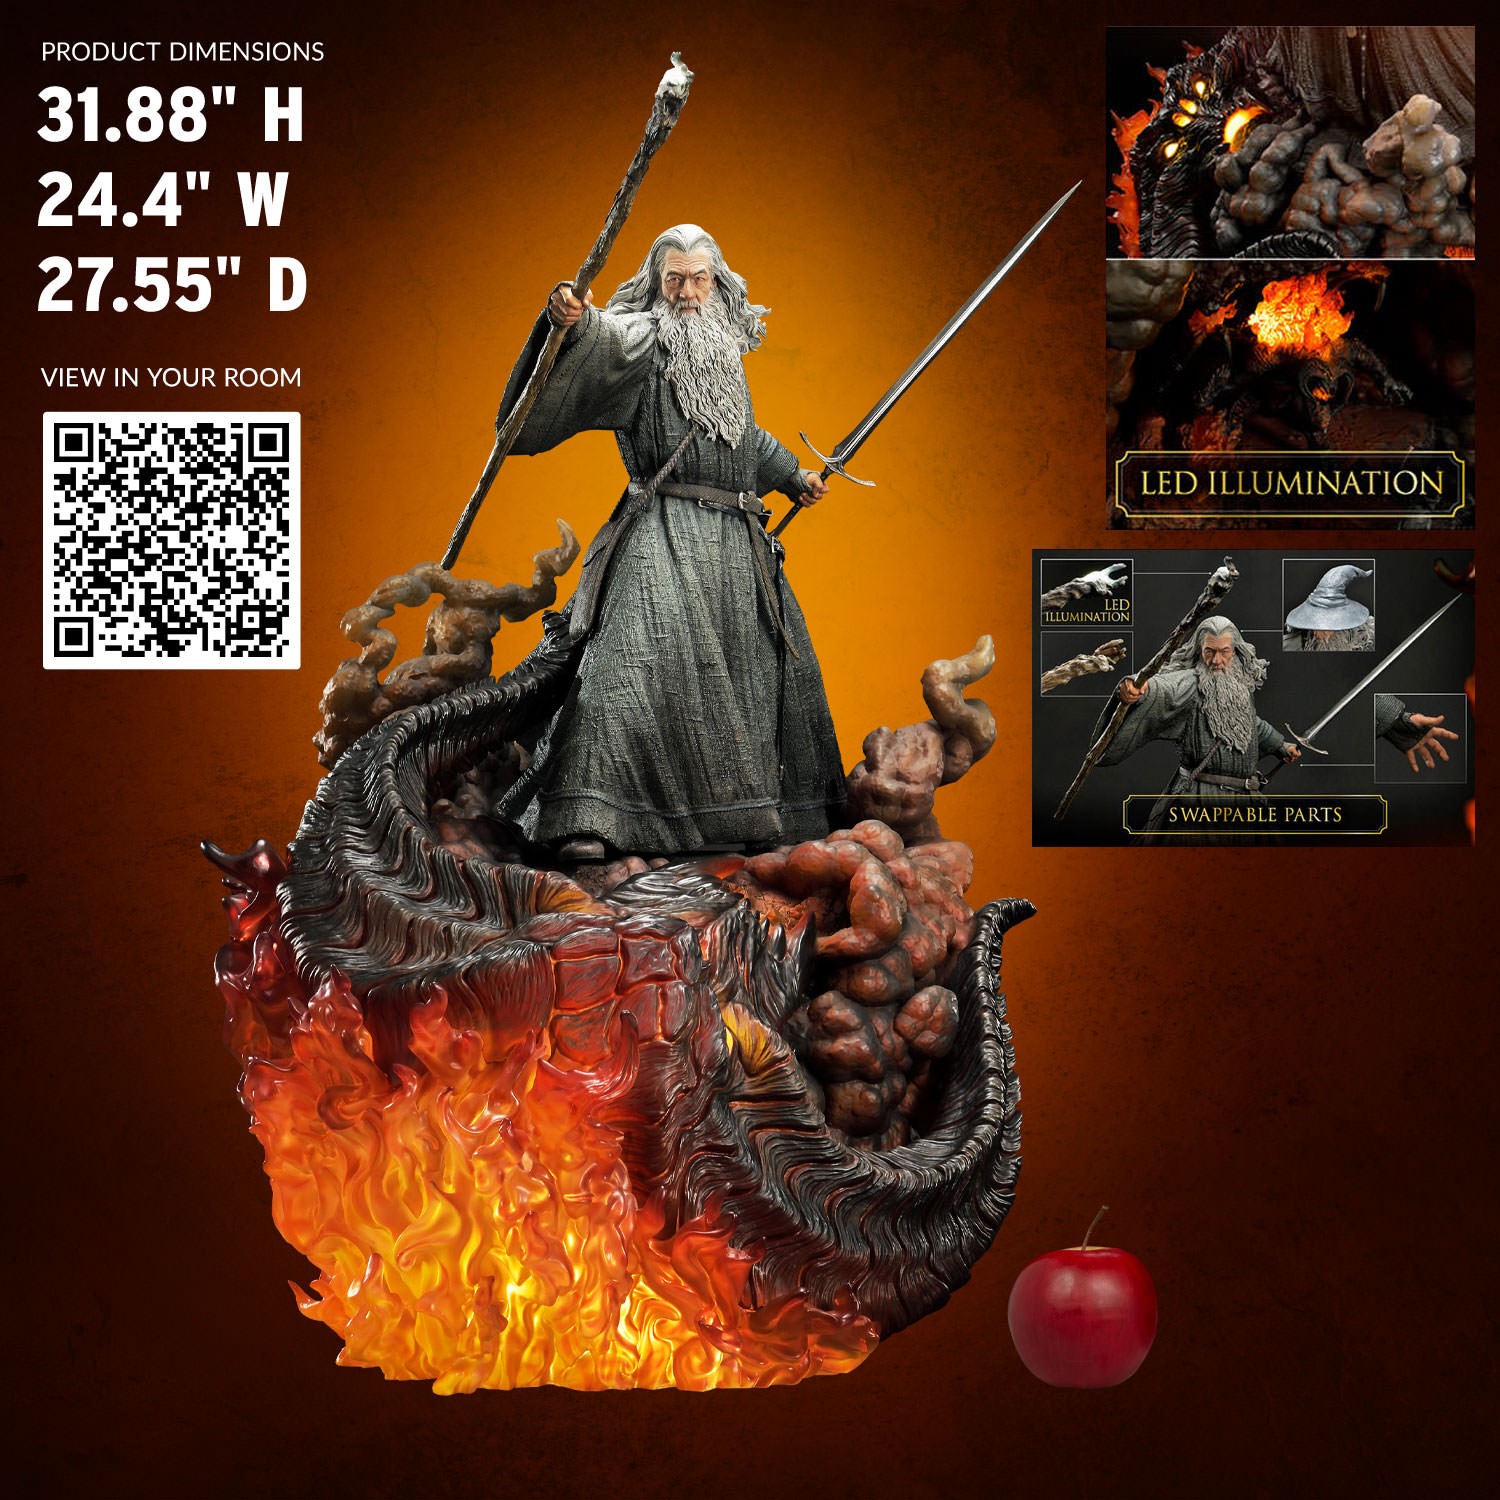 GANDALF THE GREY 1/4 Scale Statue Gandalf-the-grey-ultimate-version_the-lord-of-the-rings_scale_64c428da4484a